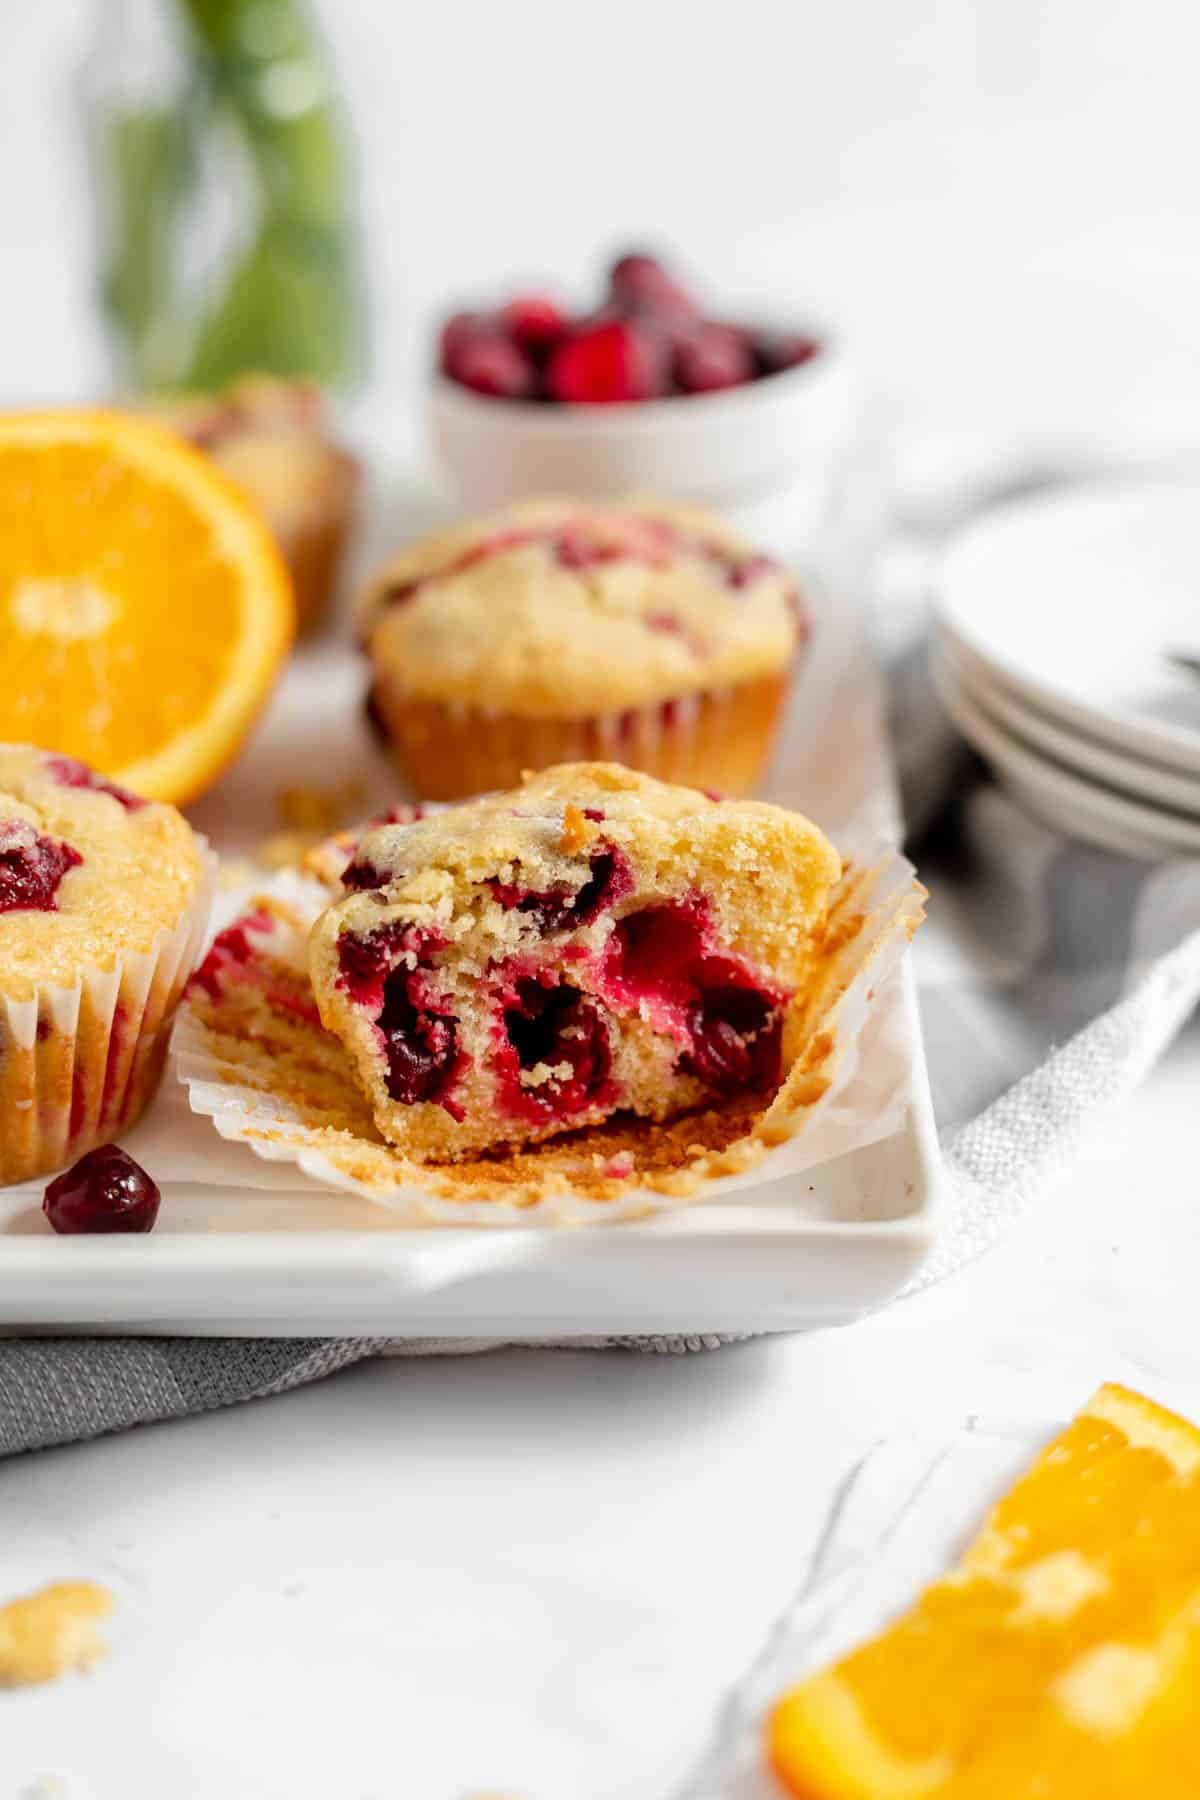 An unwrapped half of a cranberry orange muffin on a white plate.